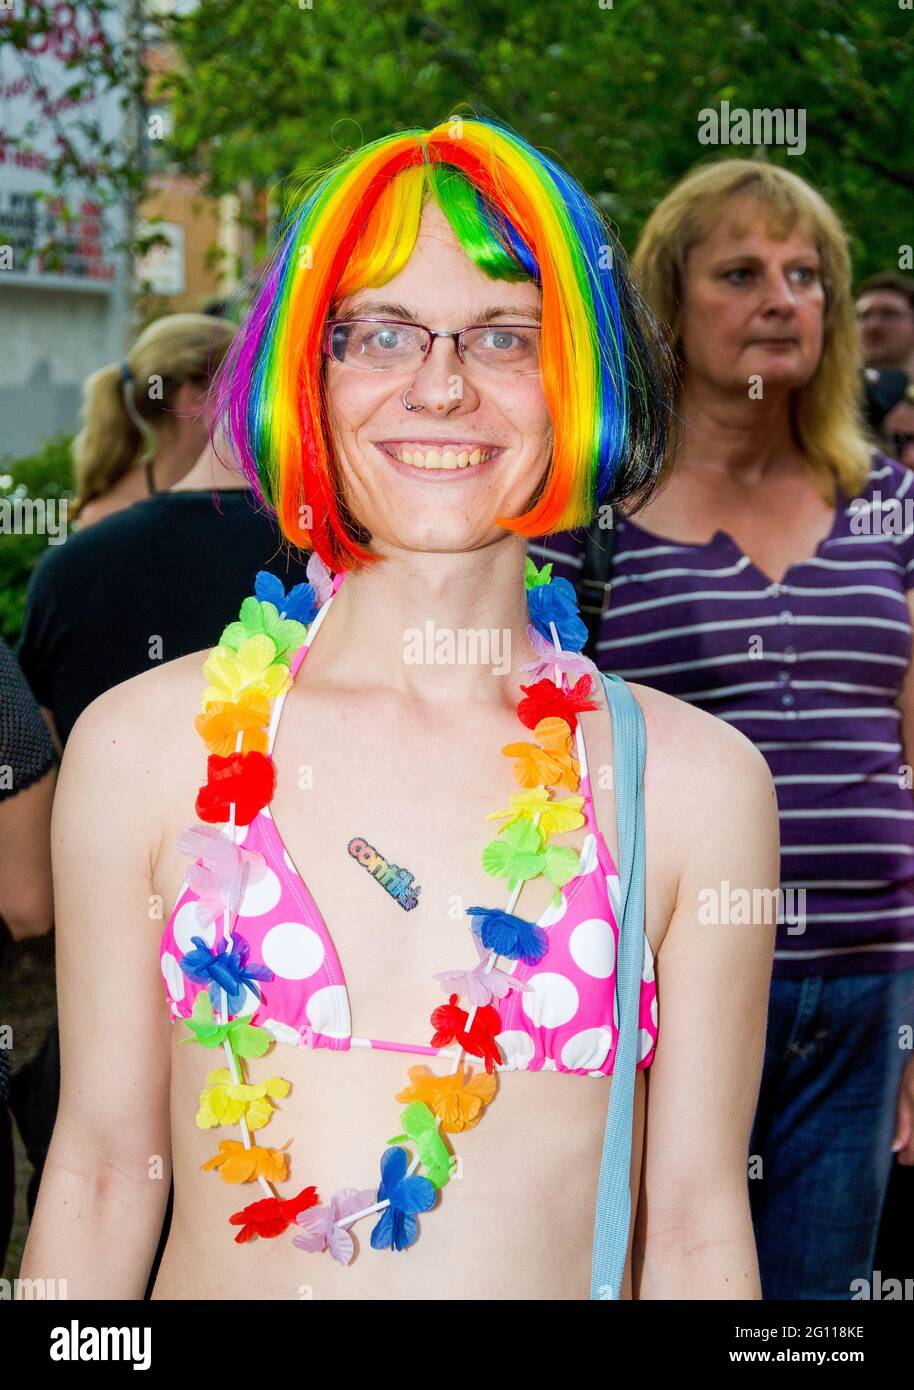 toronto pride parade, girl in a pink polka dot bikini with flower hawaii necklace, rainbow color hair, blue eyes, wearing glasses and nose ring, mediu Stock Photo